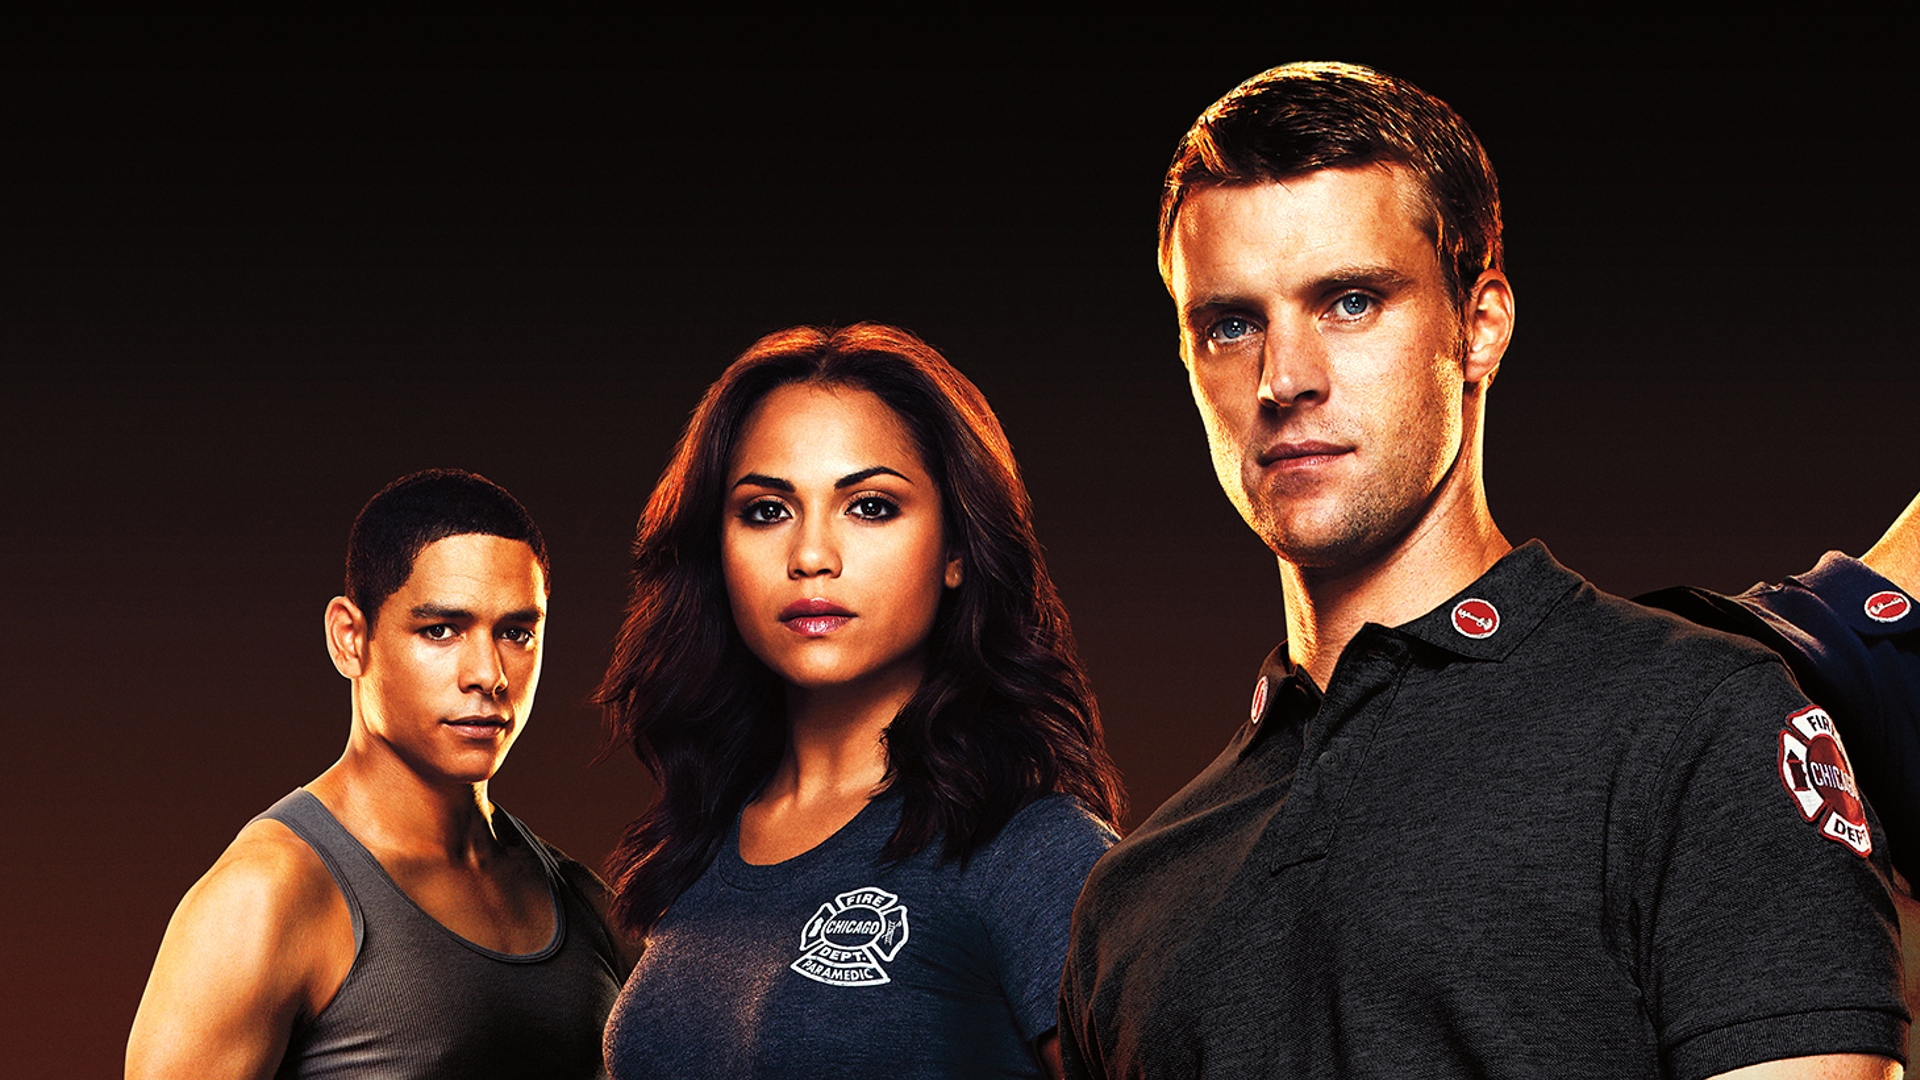 Chicago Fire Season 11 Solved One Major Problem, But in a Heartbreaking Way